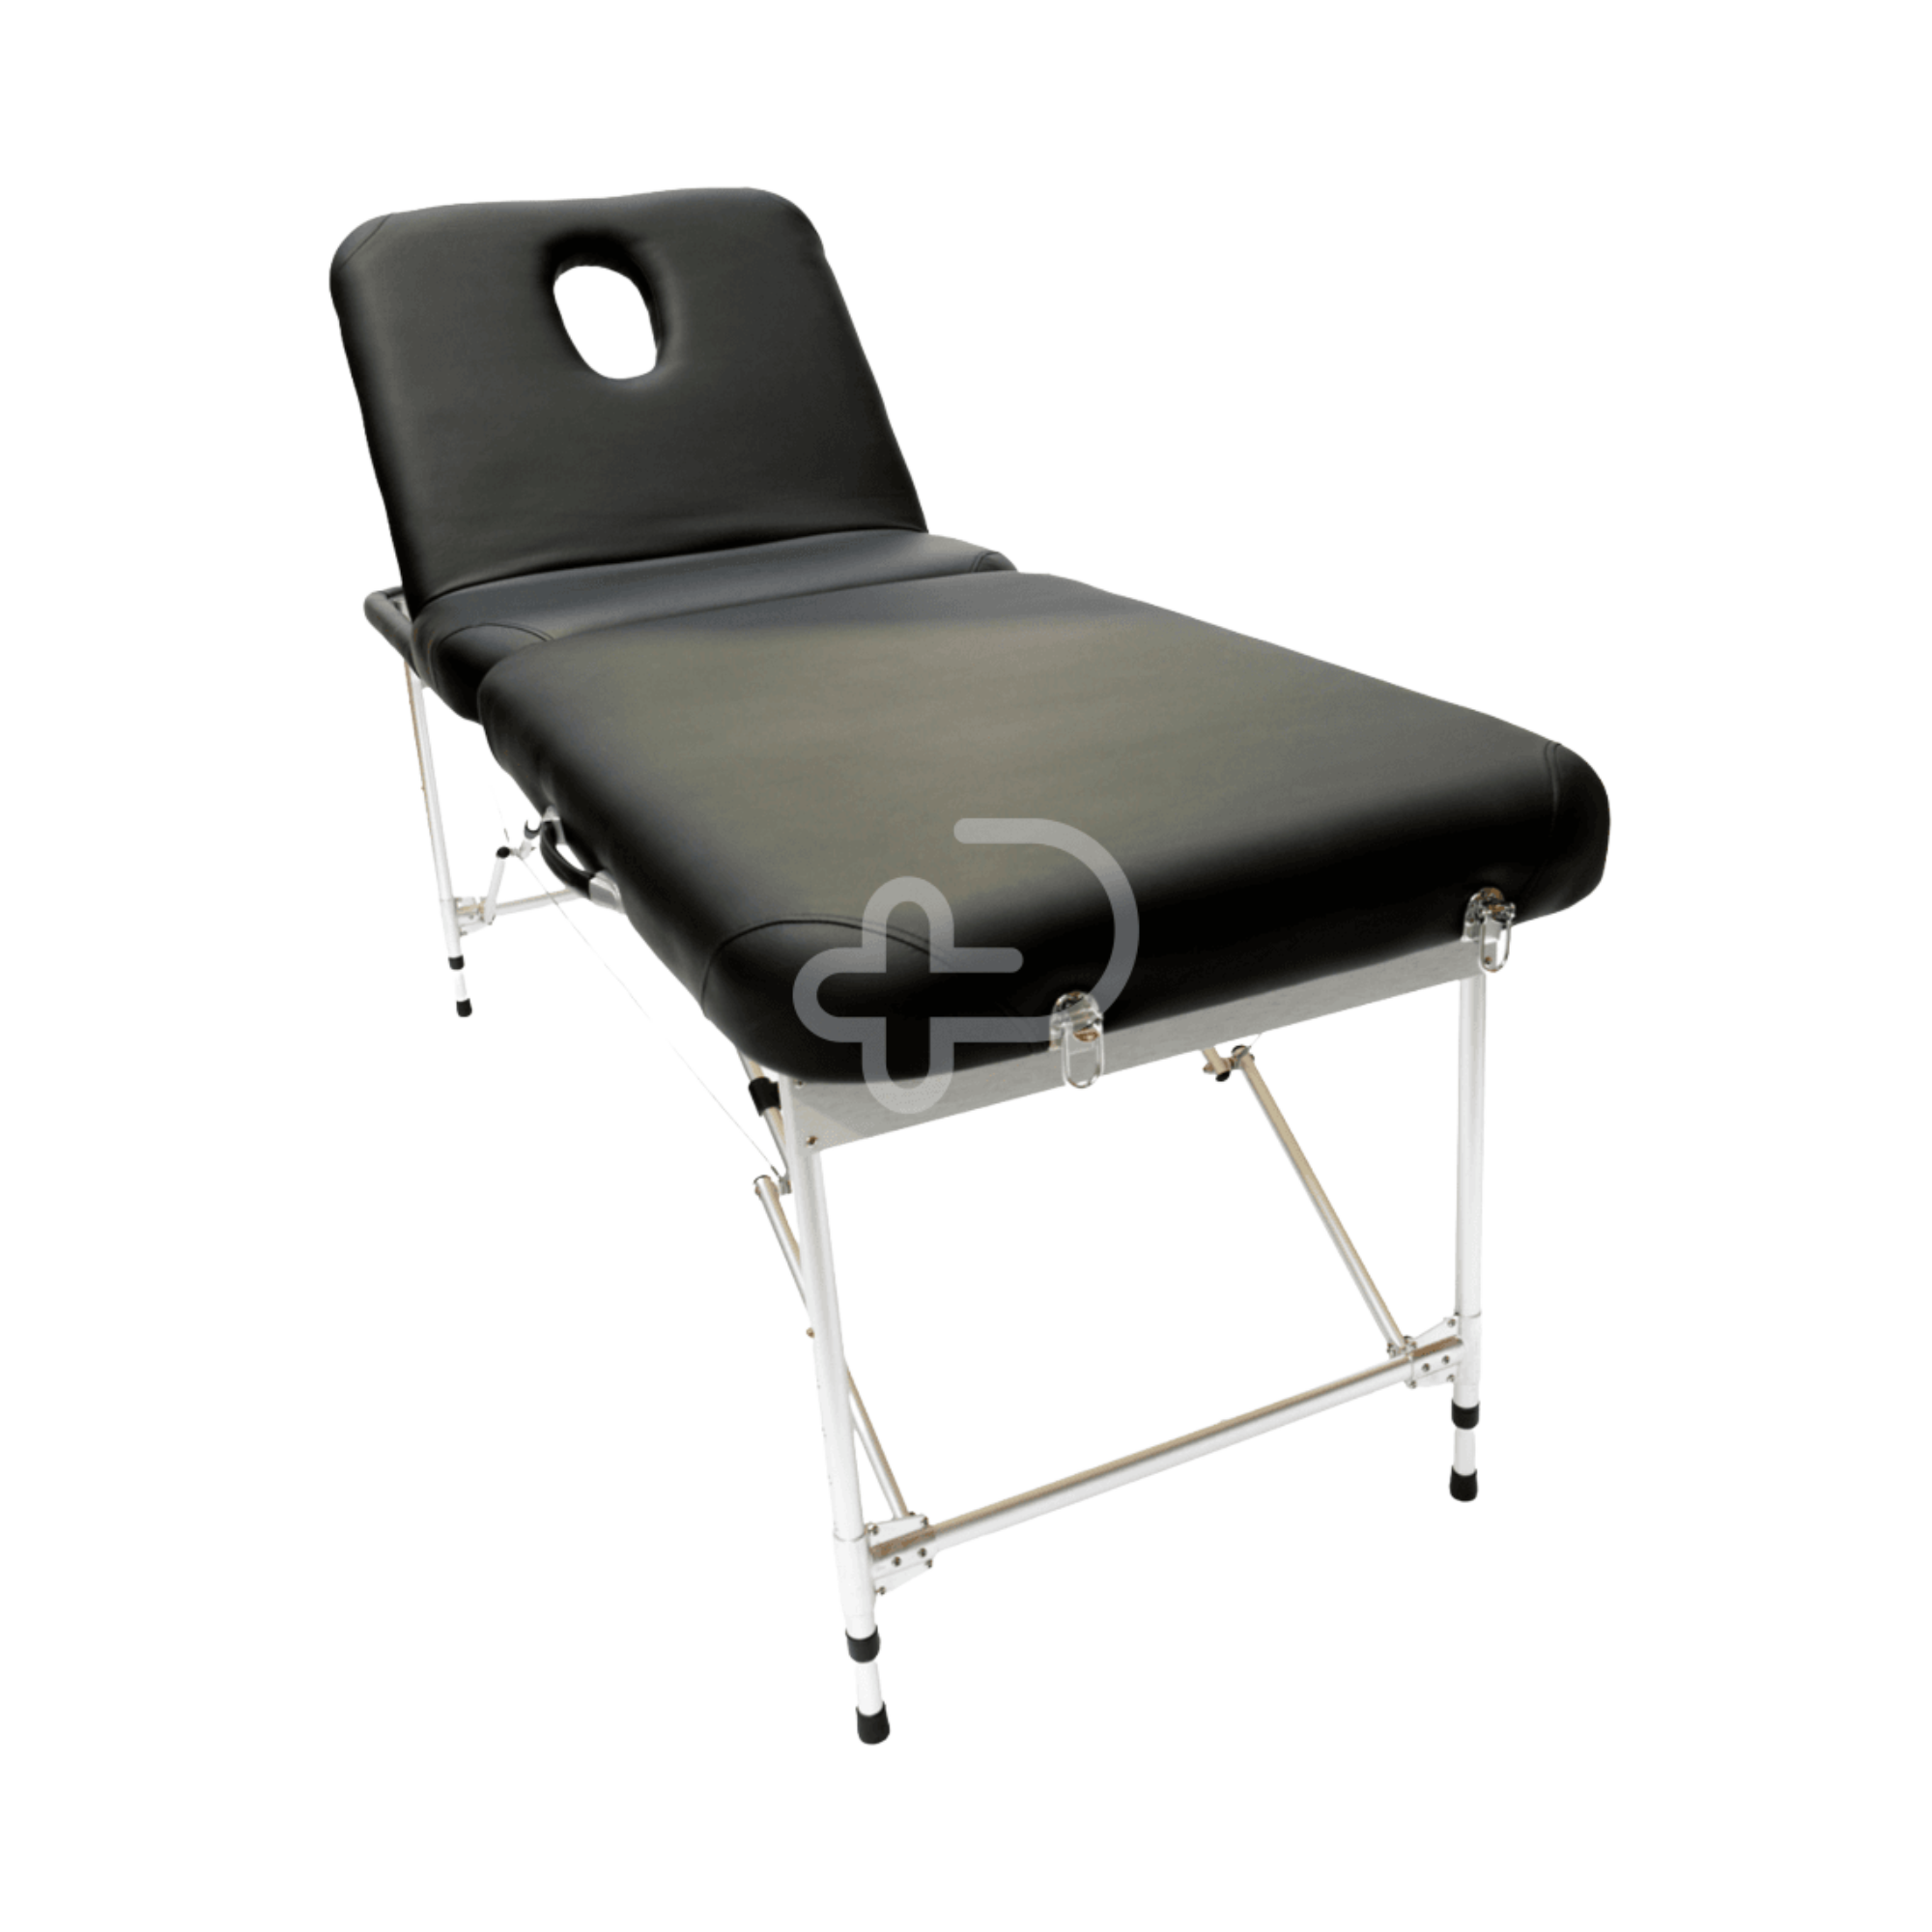 Three Section Portable Massage Table Black Examination Couches & Tables